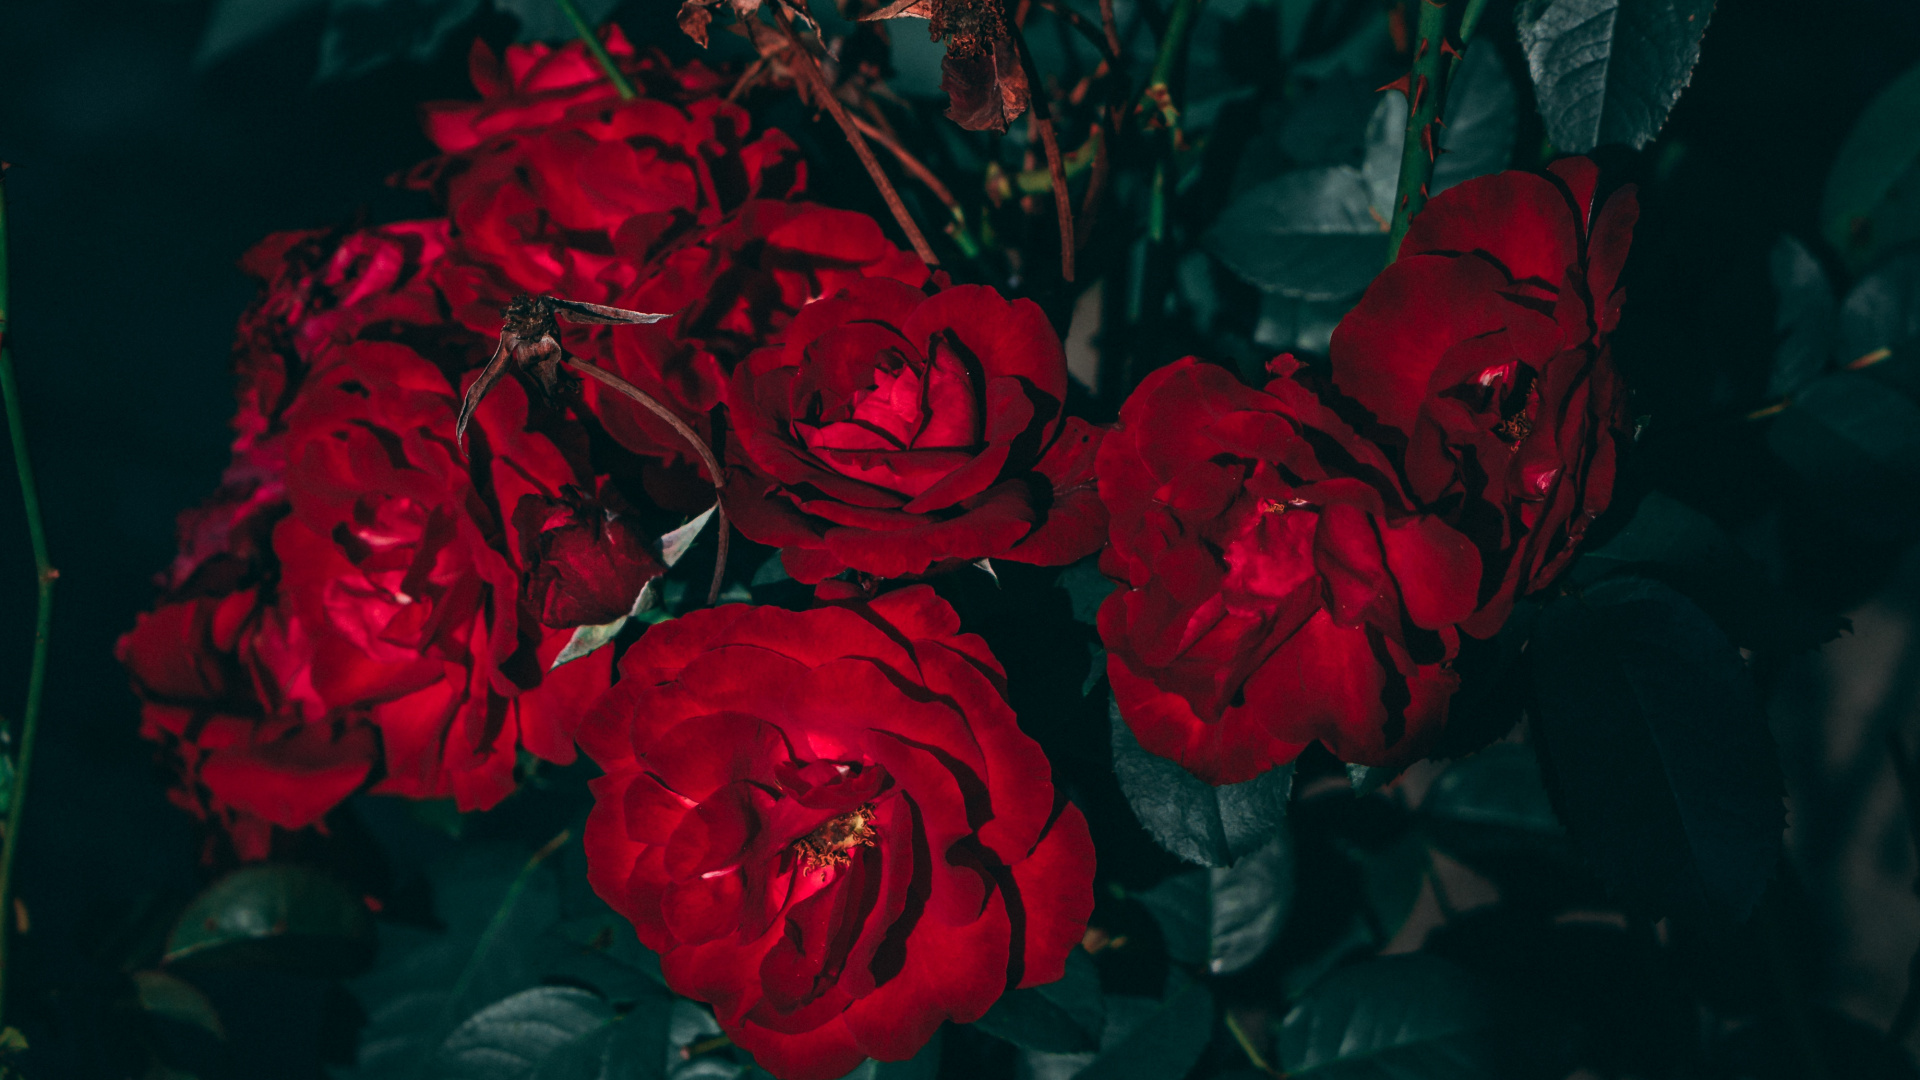 Red Roses in Close up Photography. Wallpaper in 1920x1080 Resolution